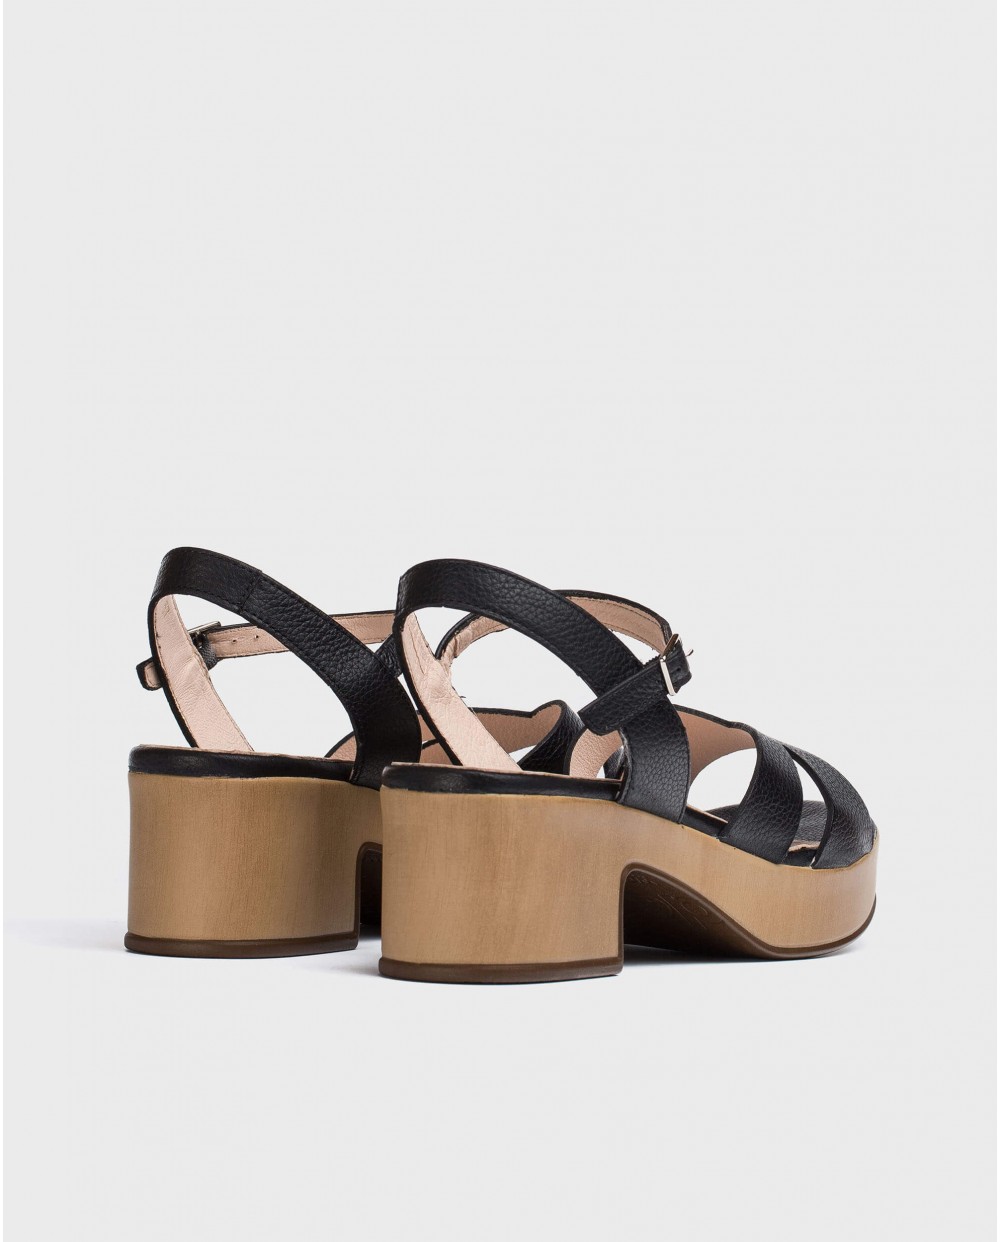 Wonders-Sandals-Wedge sandal with V cut out